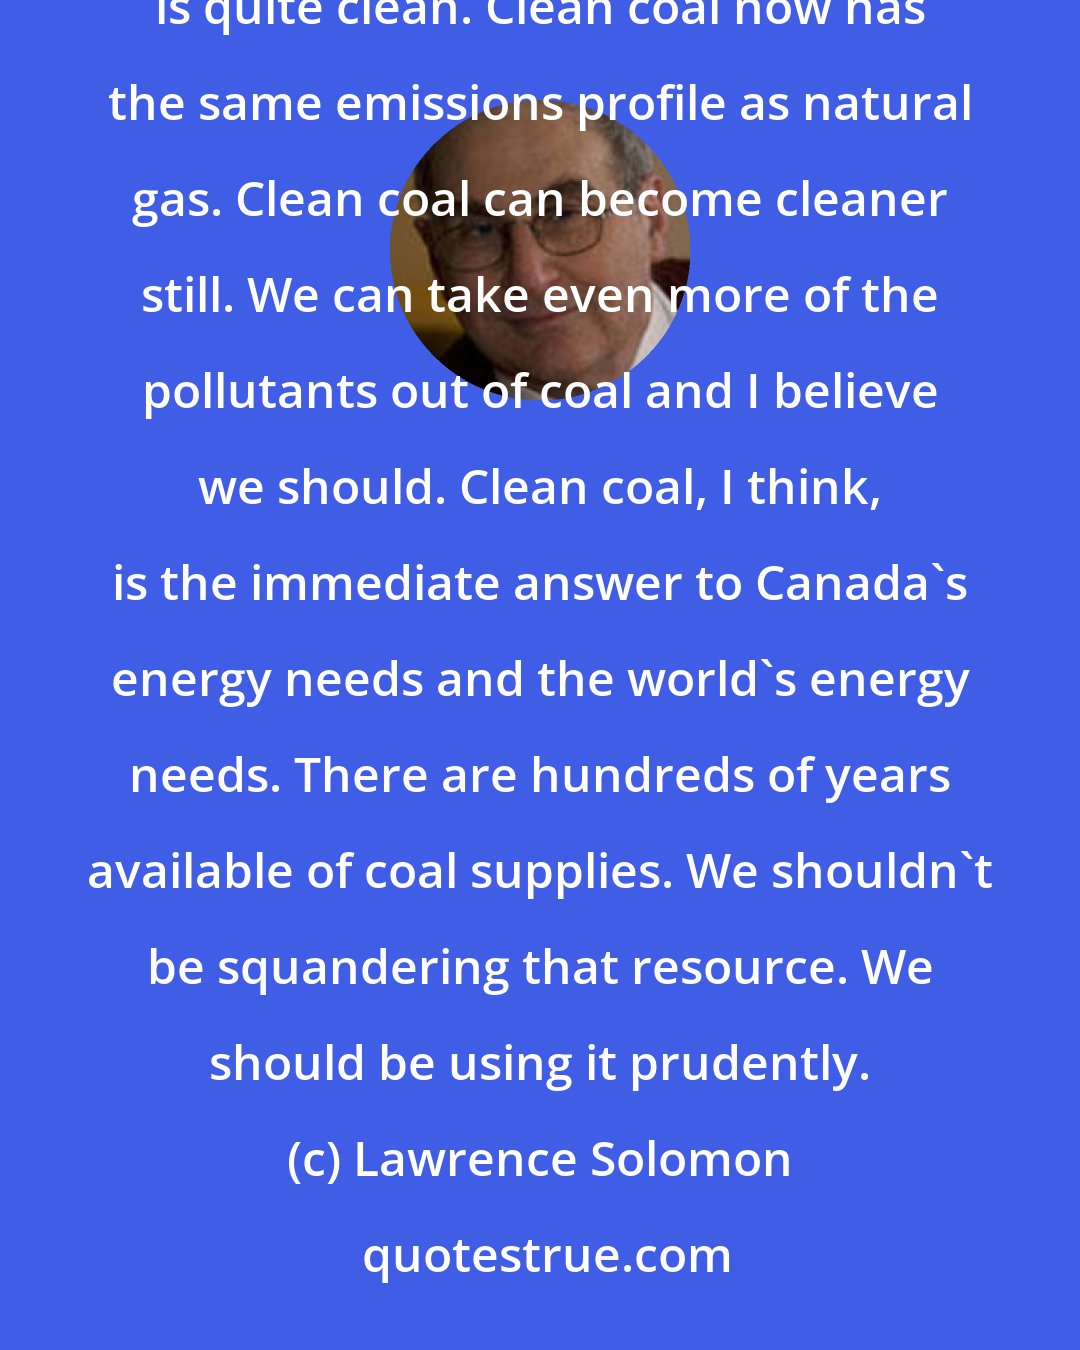 Lawrence Solomon: Coal used to be a very dirty fuel but coal has become cleaner and cleaner over the decades. Clean coal now is quite clean. Clean coal now has the same emissions profile as natural gas. Clean coal can become cleaner still. We can take even more of the pollutants out of coal and I believe we should. Clean coal, I think, is the immediate answer to Canada's energy needs and the world's energy needs. There are hundreds of years available of coal supplies. We shouldn't be squandering that resource. We should be using it prudently.